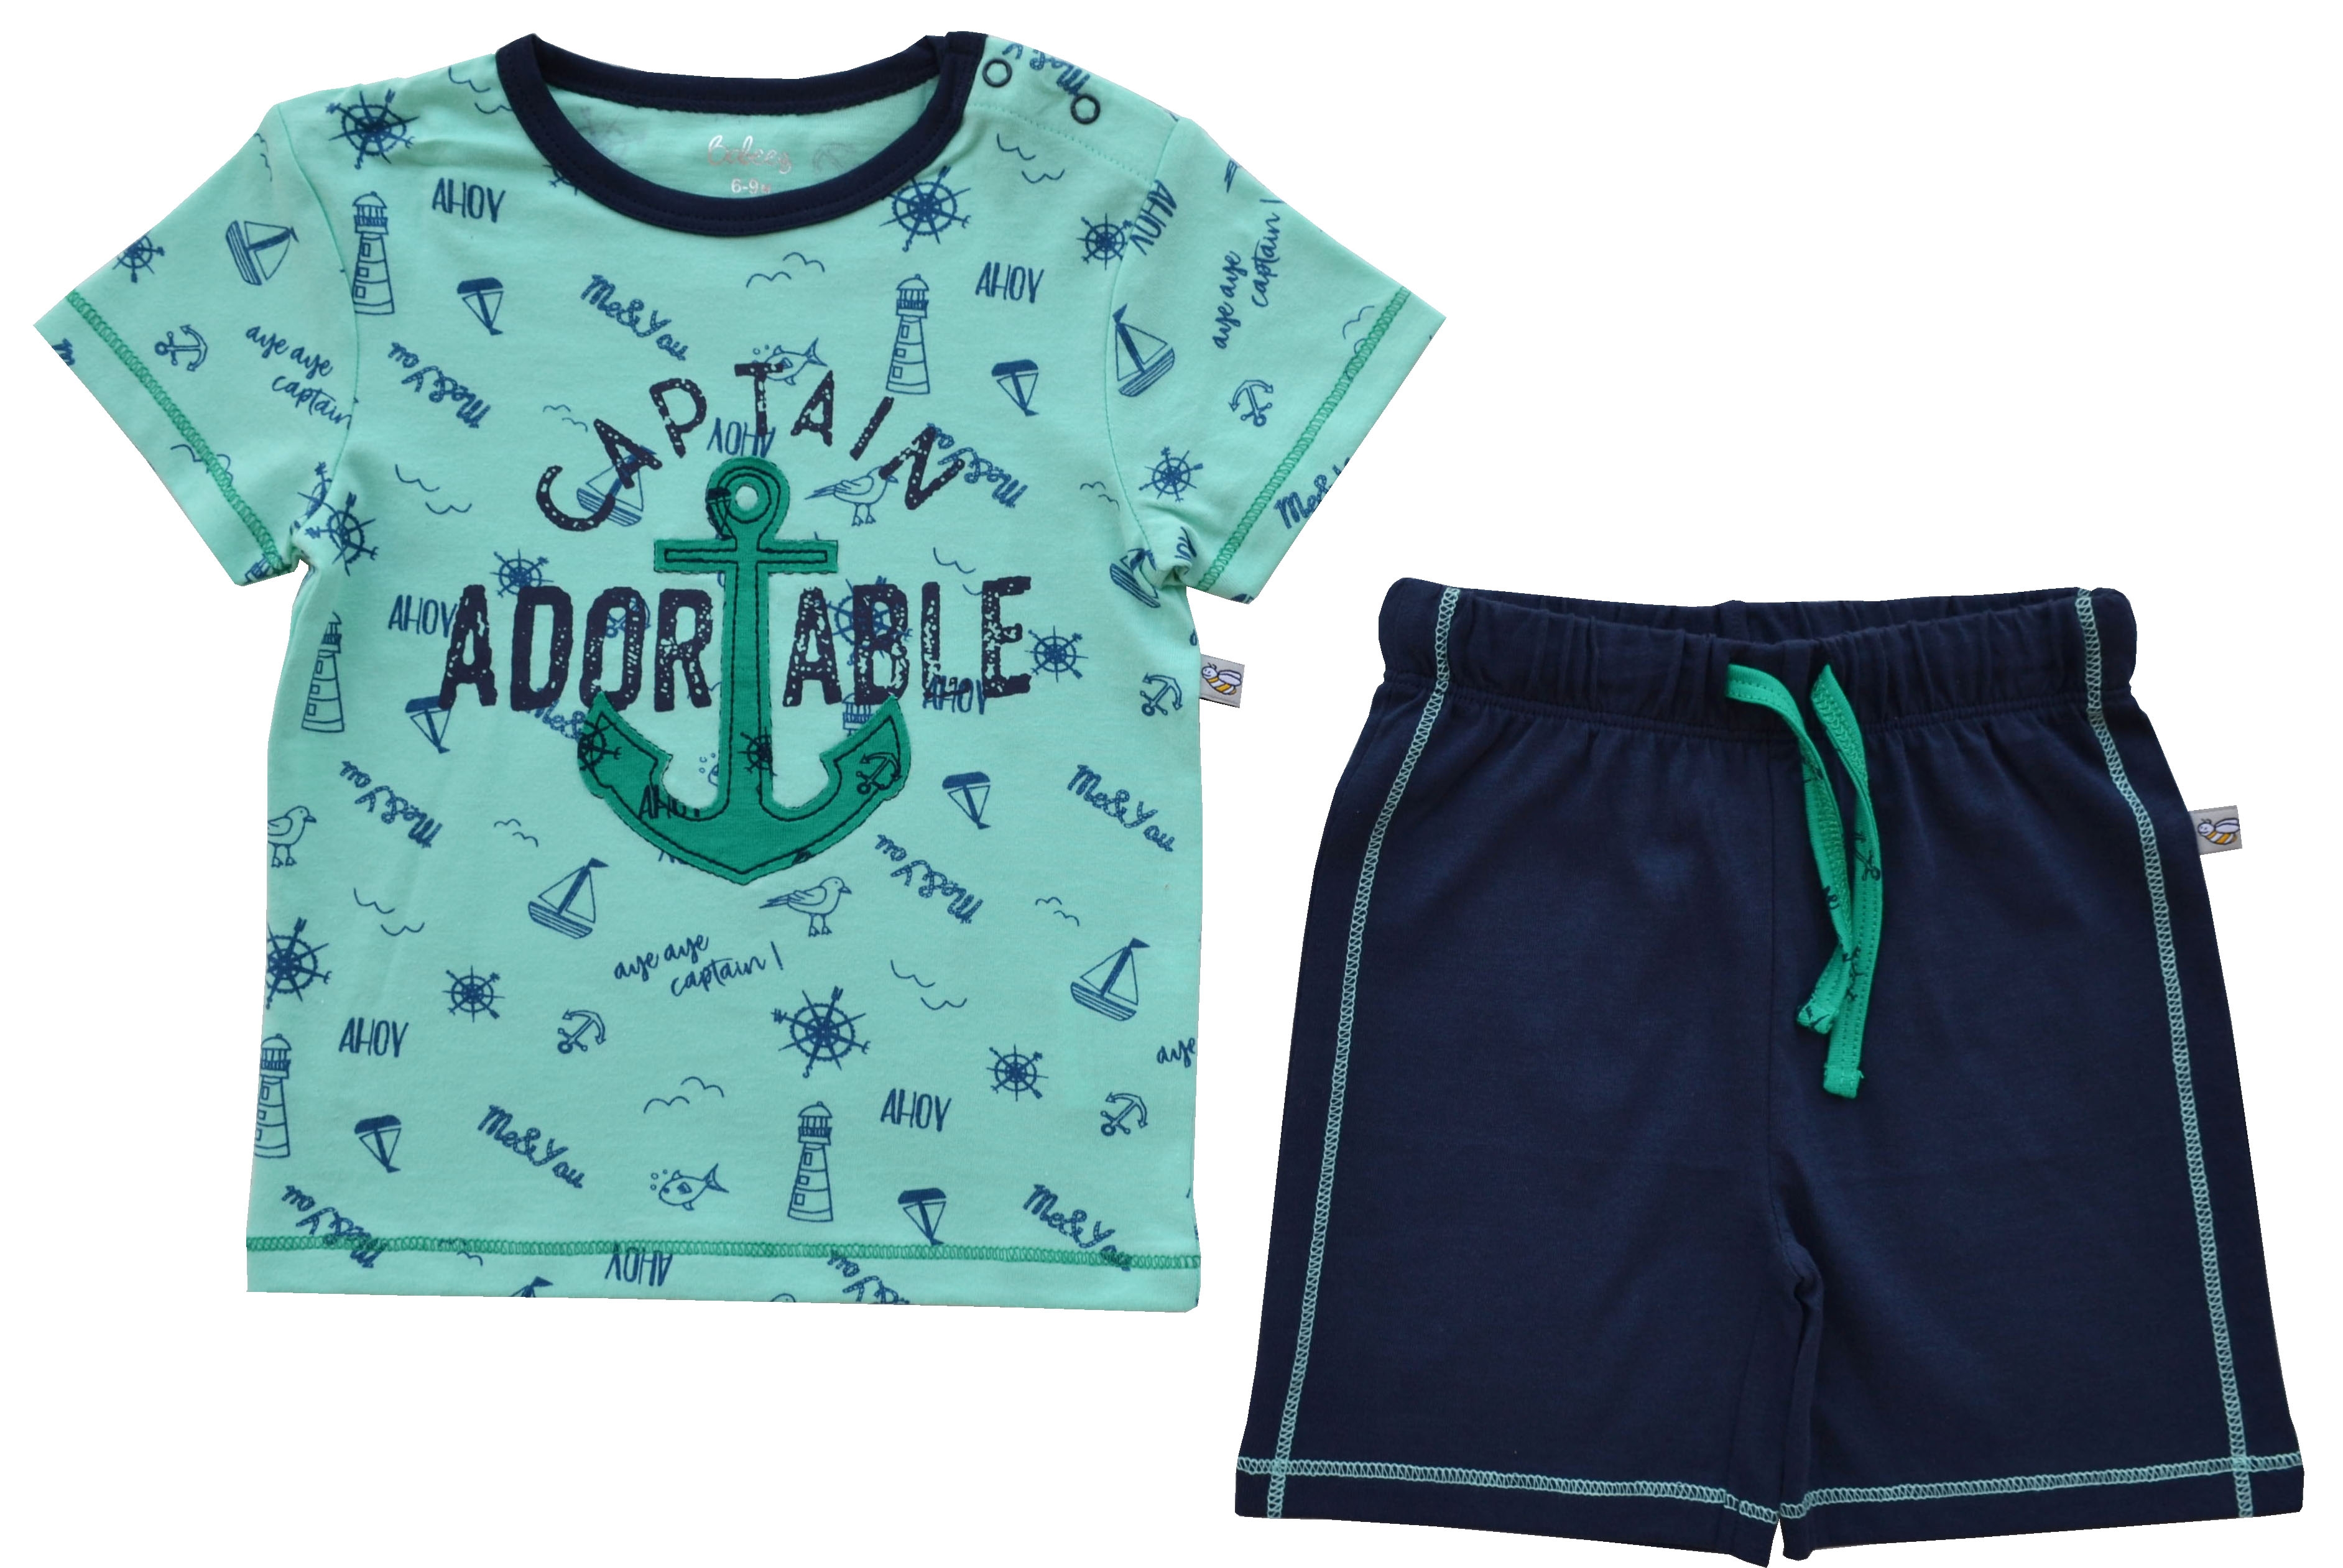 Babeez | Allover Print and Anchor Chest Print on Green T-Shirt + Navy Shorty Set(100% Cotton Single Jersey) undefined